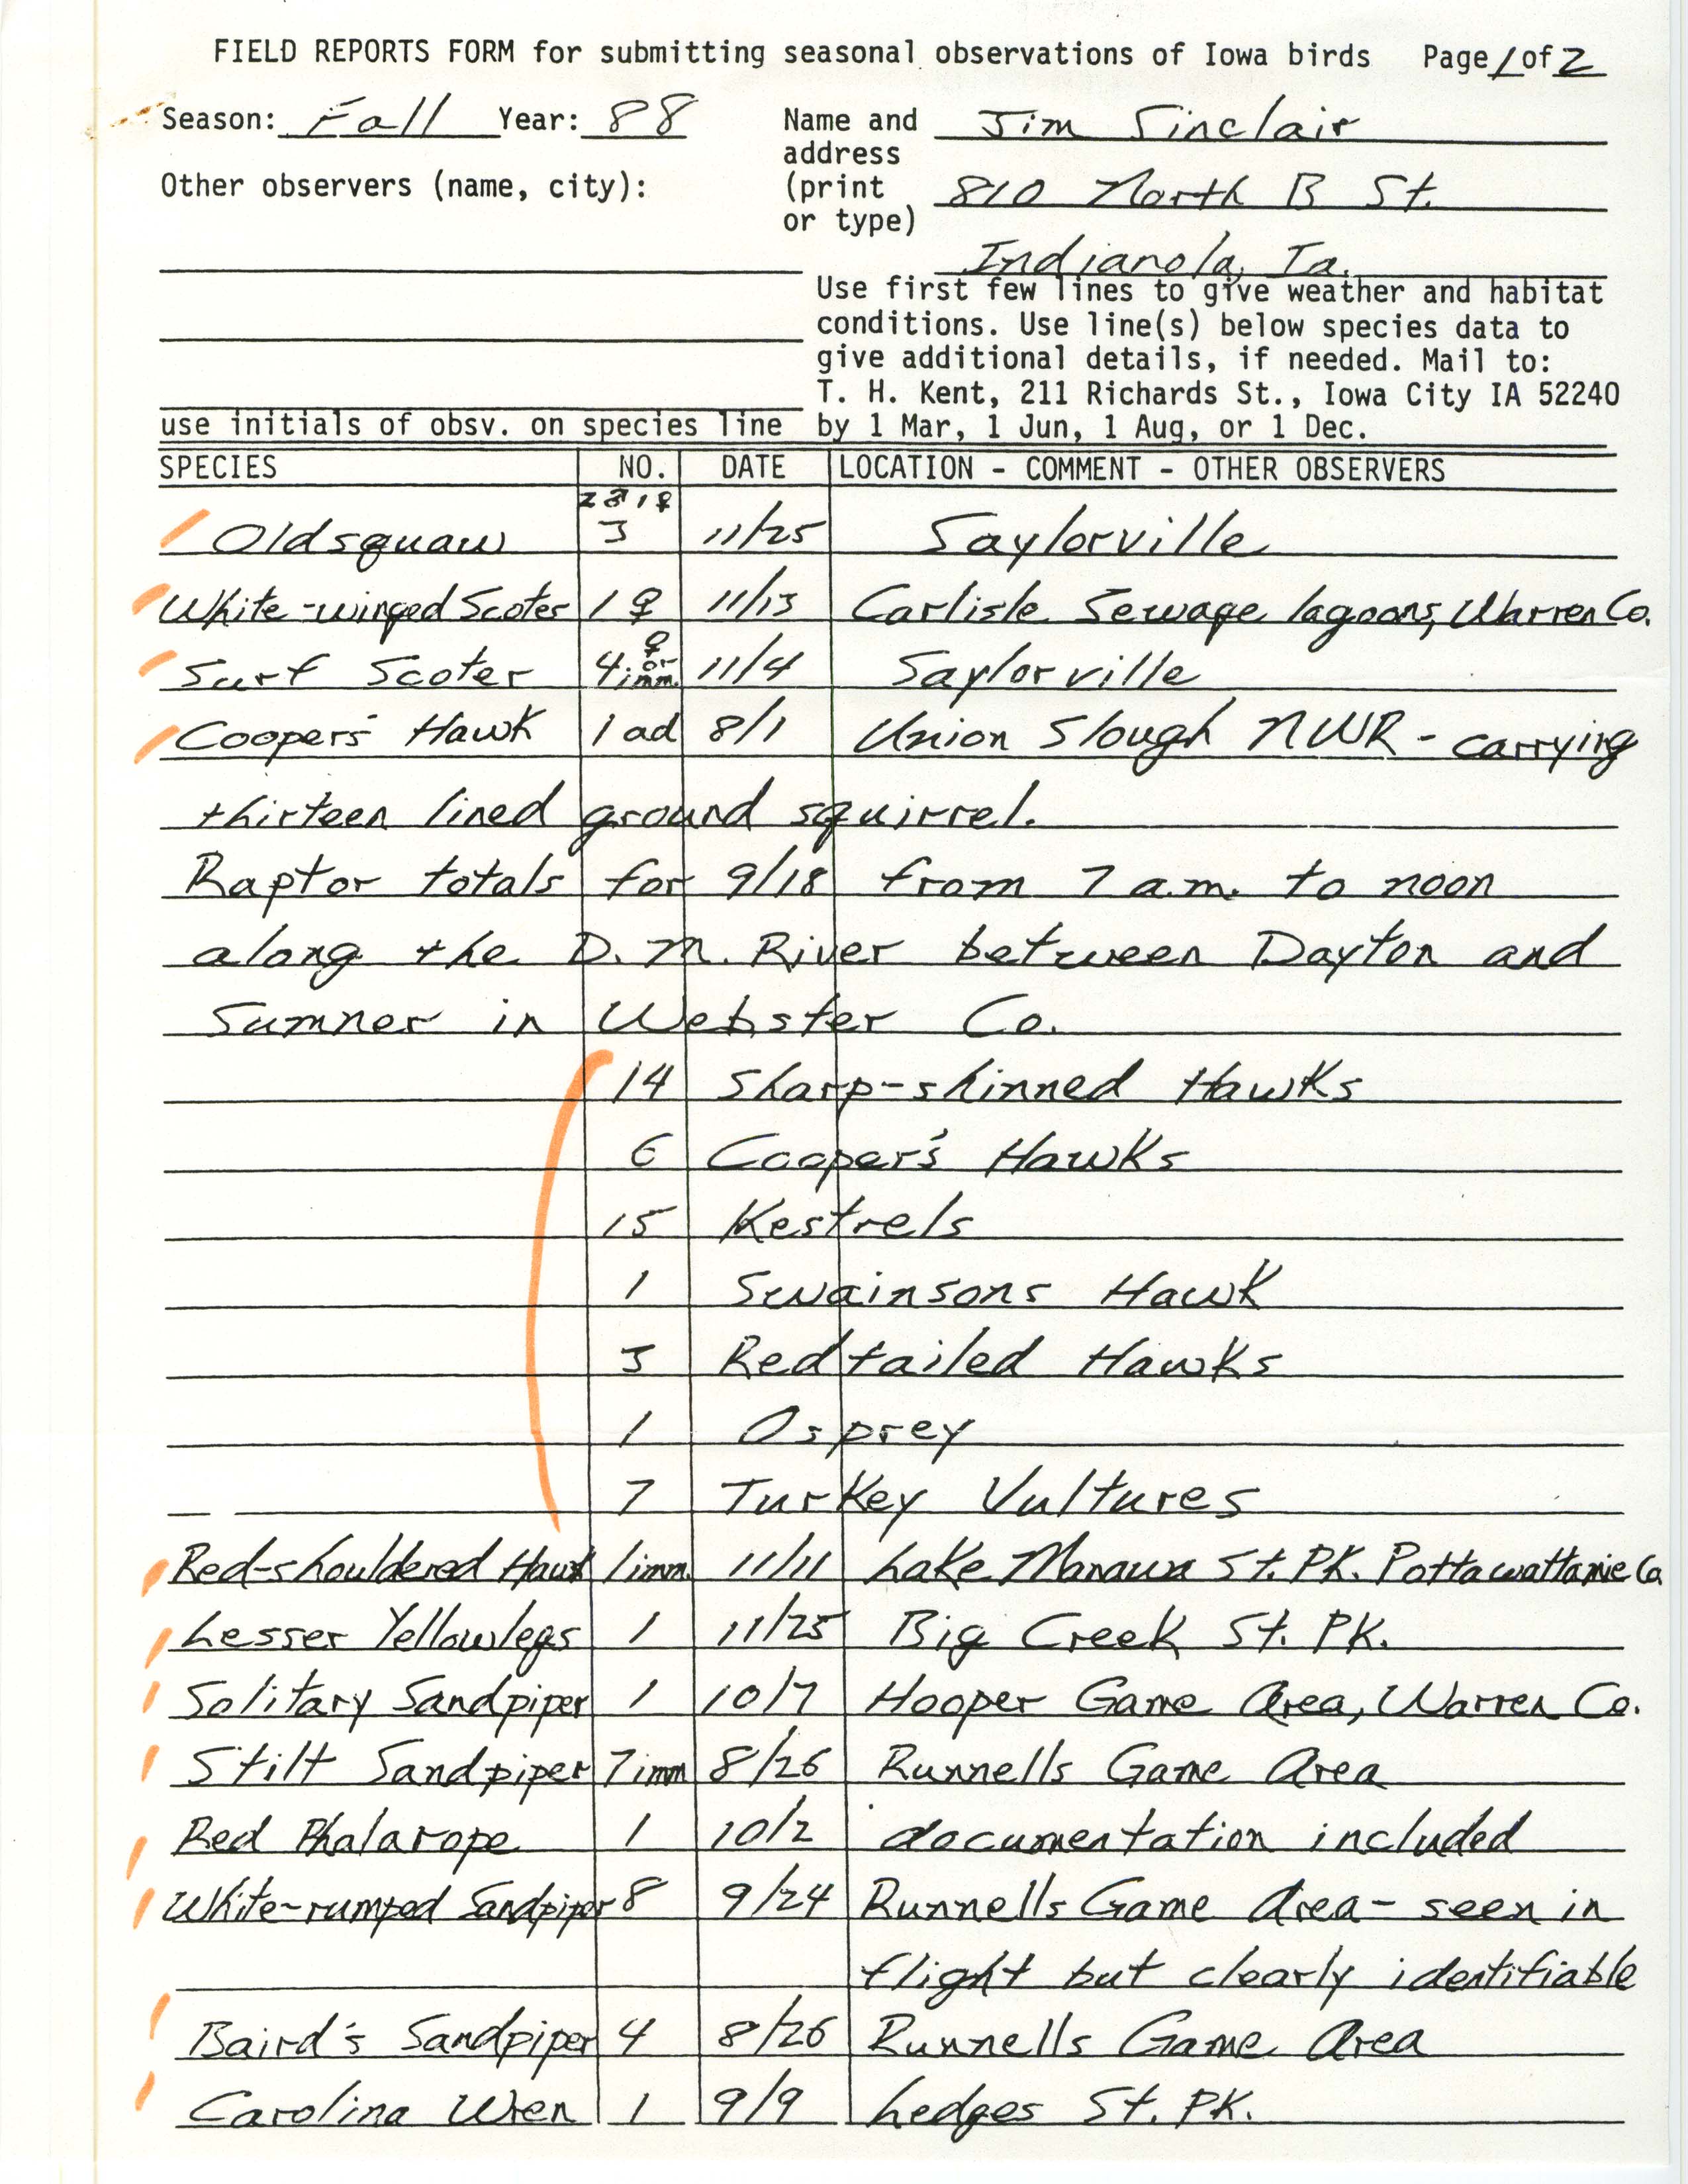 Field reports form for submitting seasonal observations of Iowa birds, Jim Sinclair, fall 1988